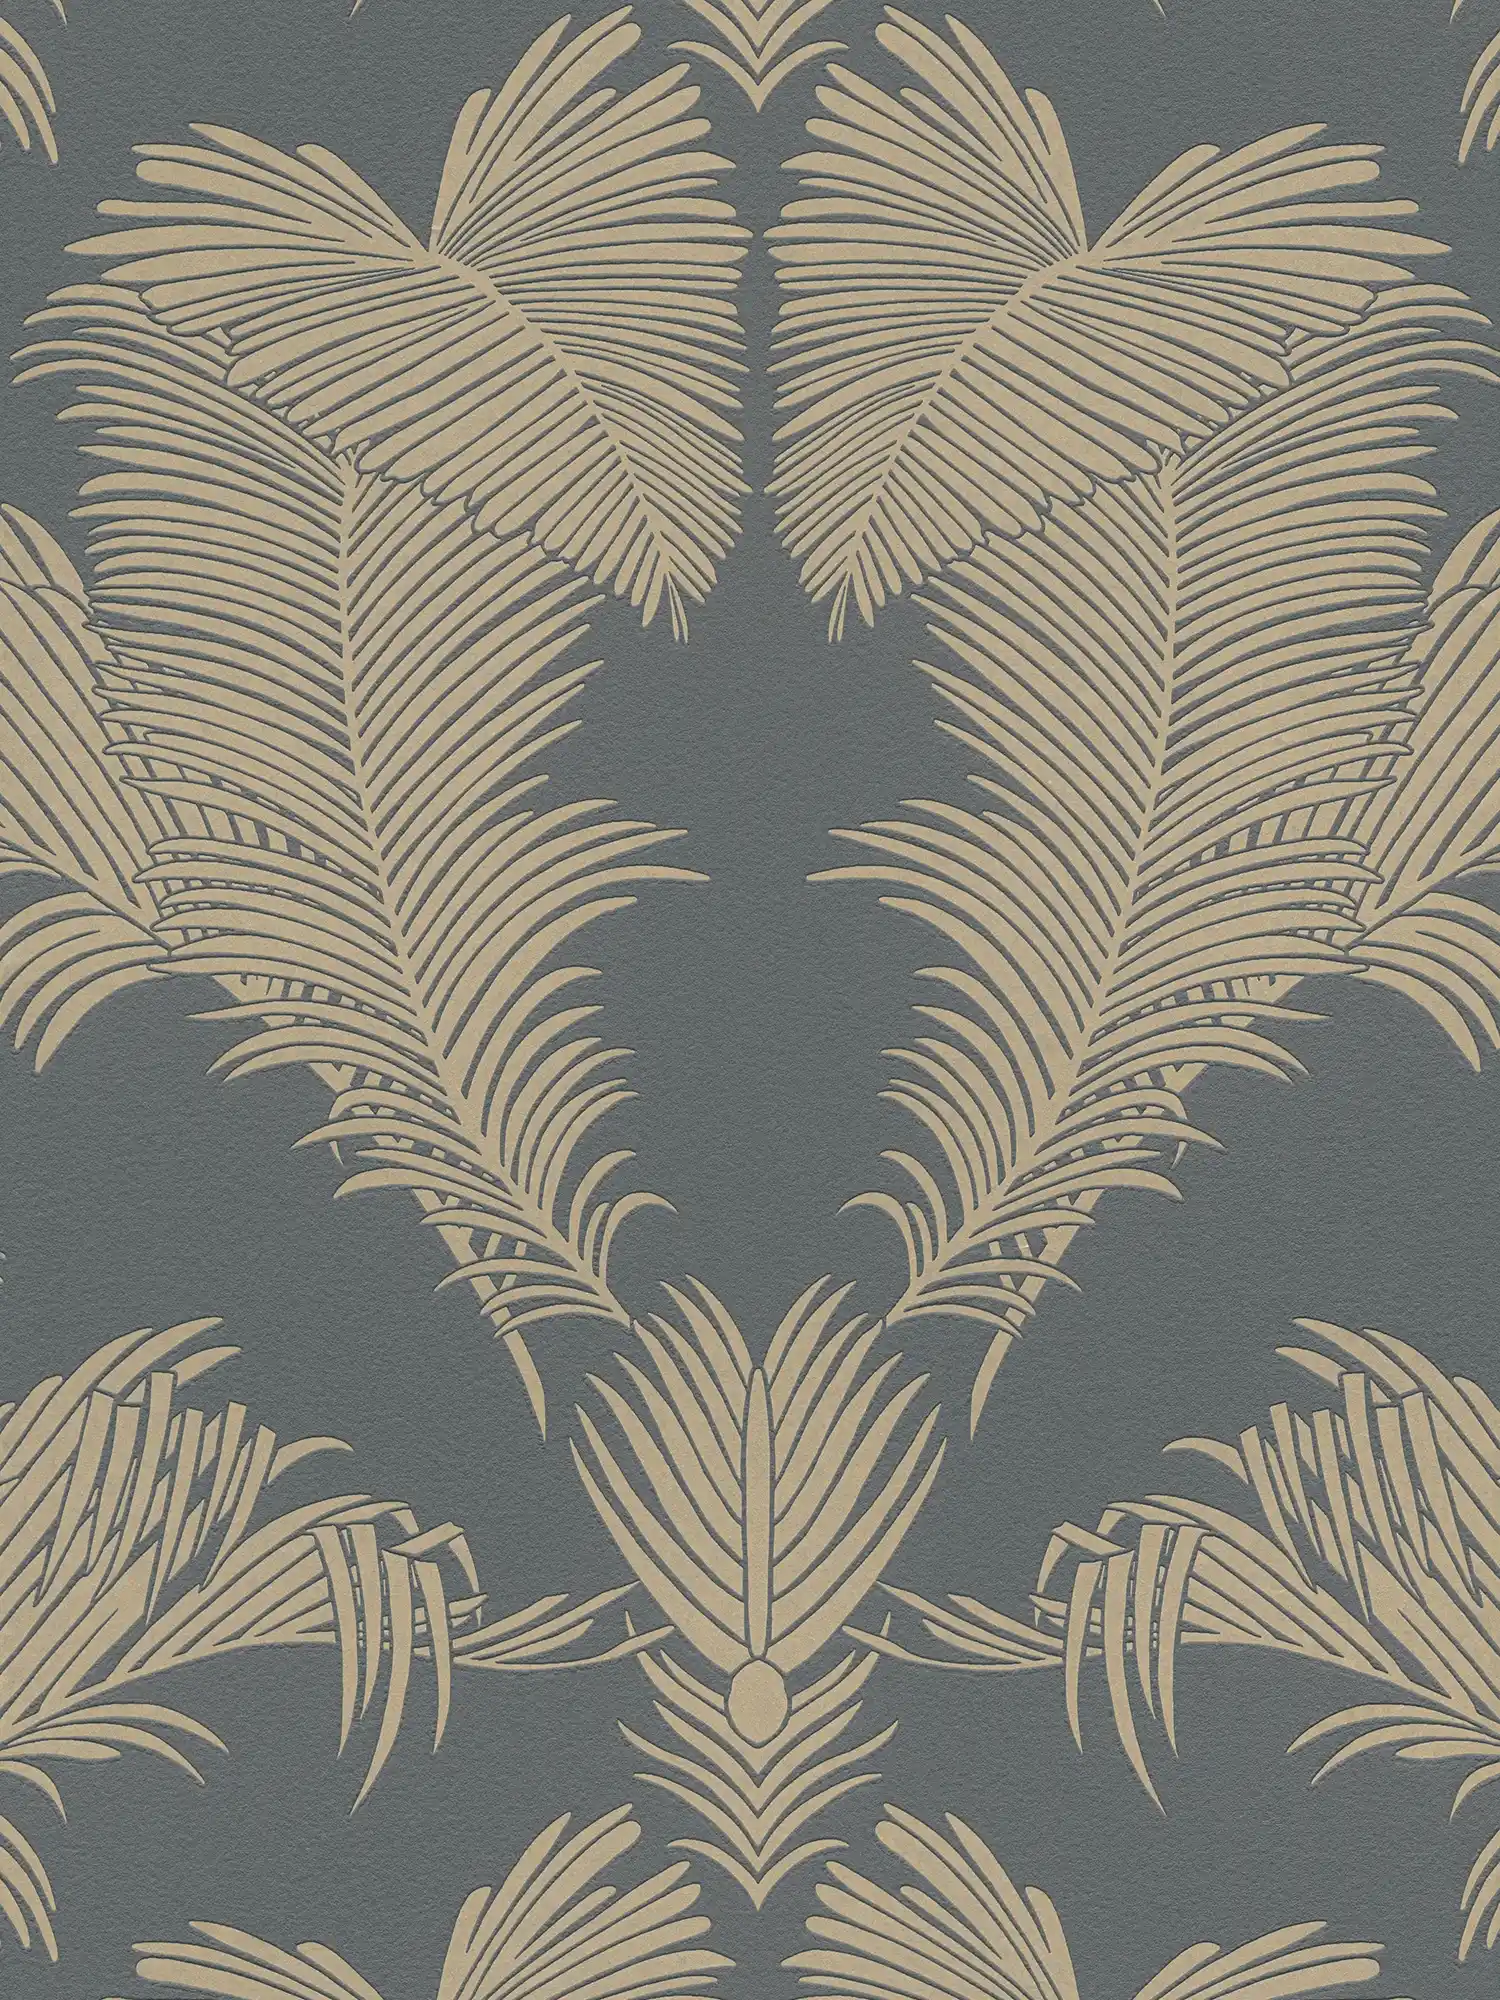 Palm leaves wallpaper grey & gold with texture & metallic effect
